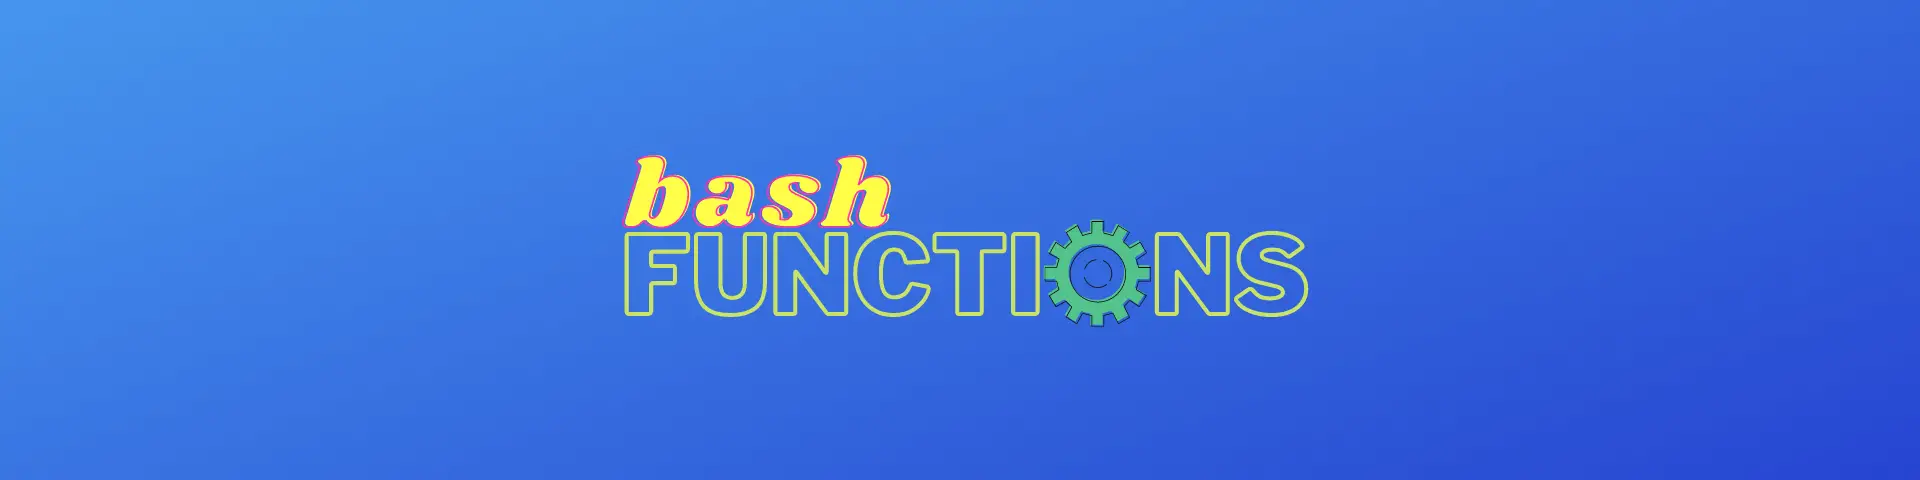 Bash functions